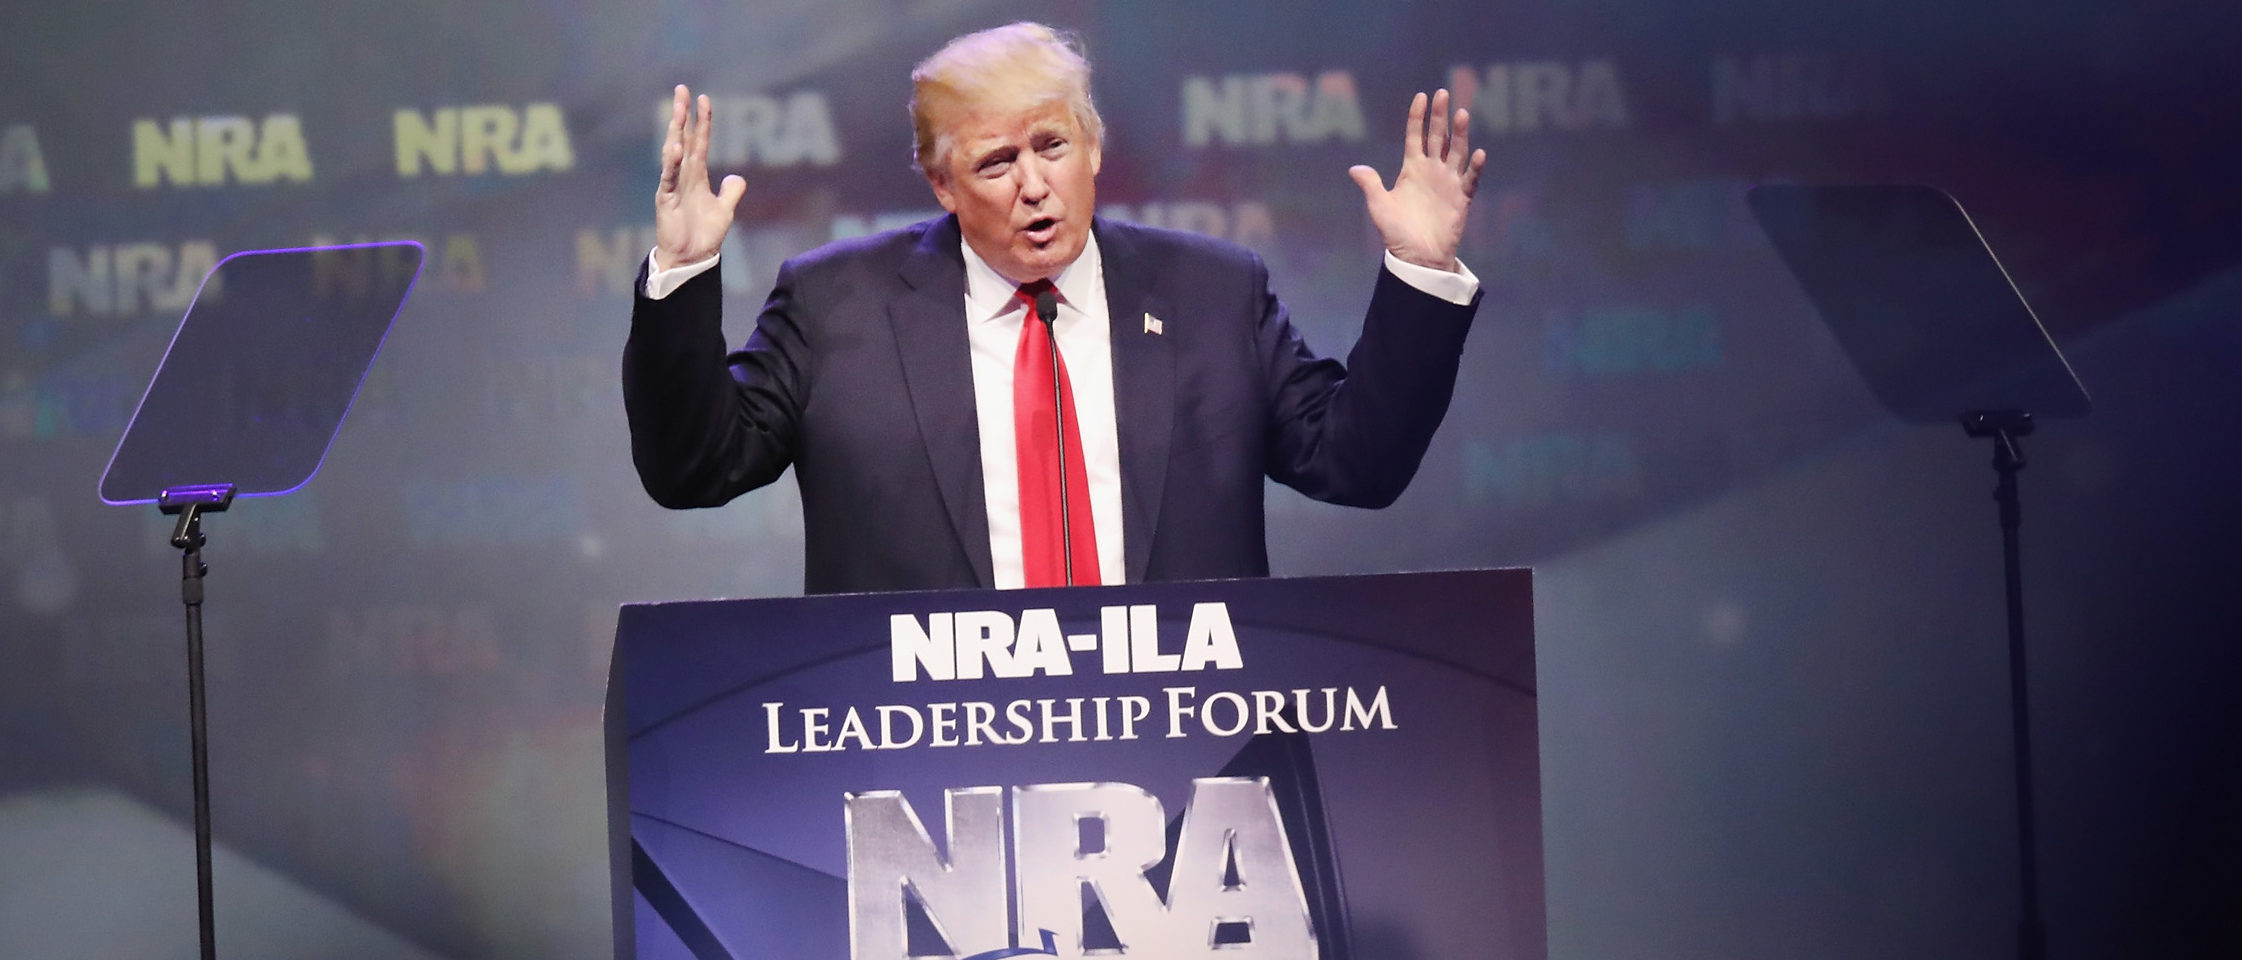 Republican presidential candidate Donald Trump speaks at the National Rifle Association's NRA-ILA Leadership Forum during the NRA Convention at the Kentucky Exposition Center on May 20, 2016 in Louisville, Kentucky. The NRA endorsed Trump at the convention. The convention runs May 22. (Photo by Scott Olson/Getty Images)